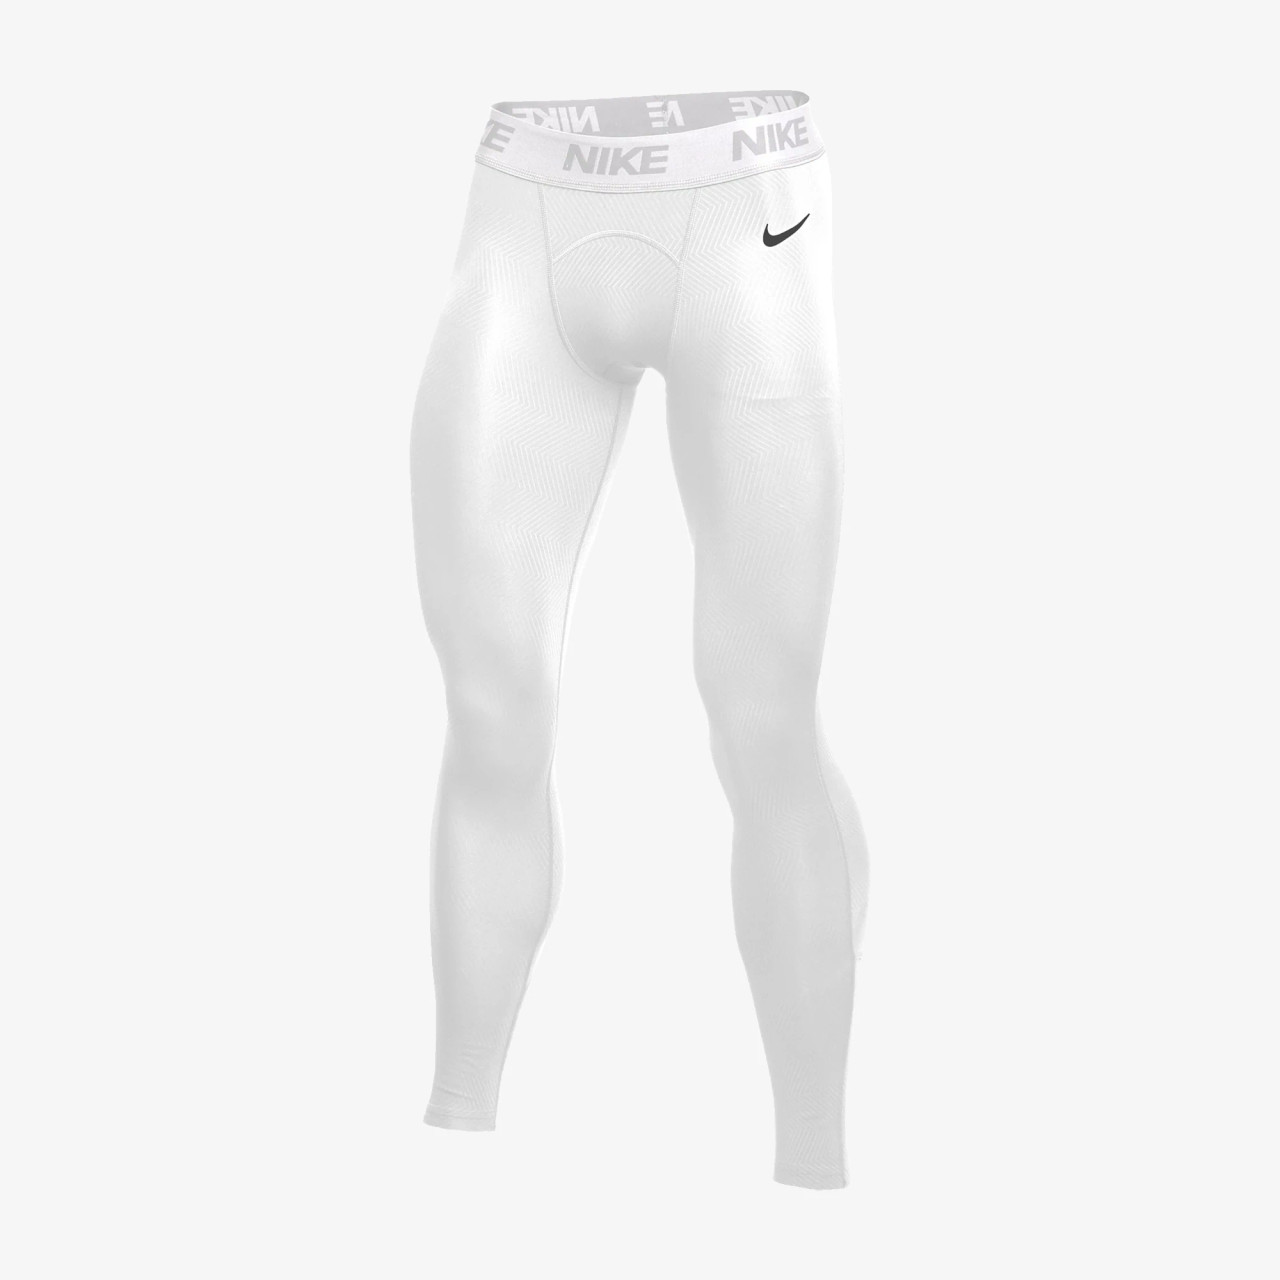 NIKE PRO THERMA COMPRESSION PANTS - Soccer Plus